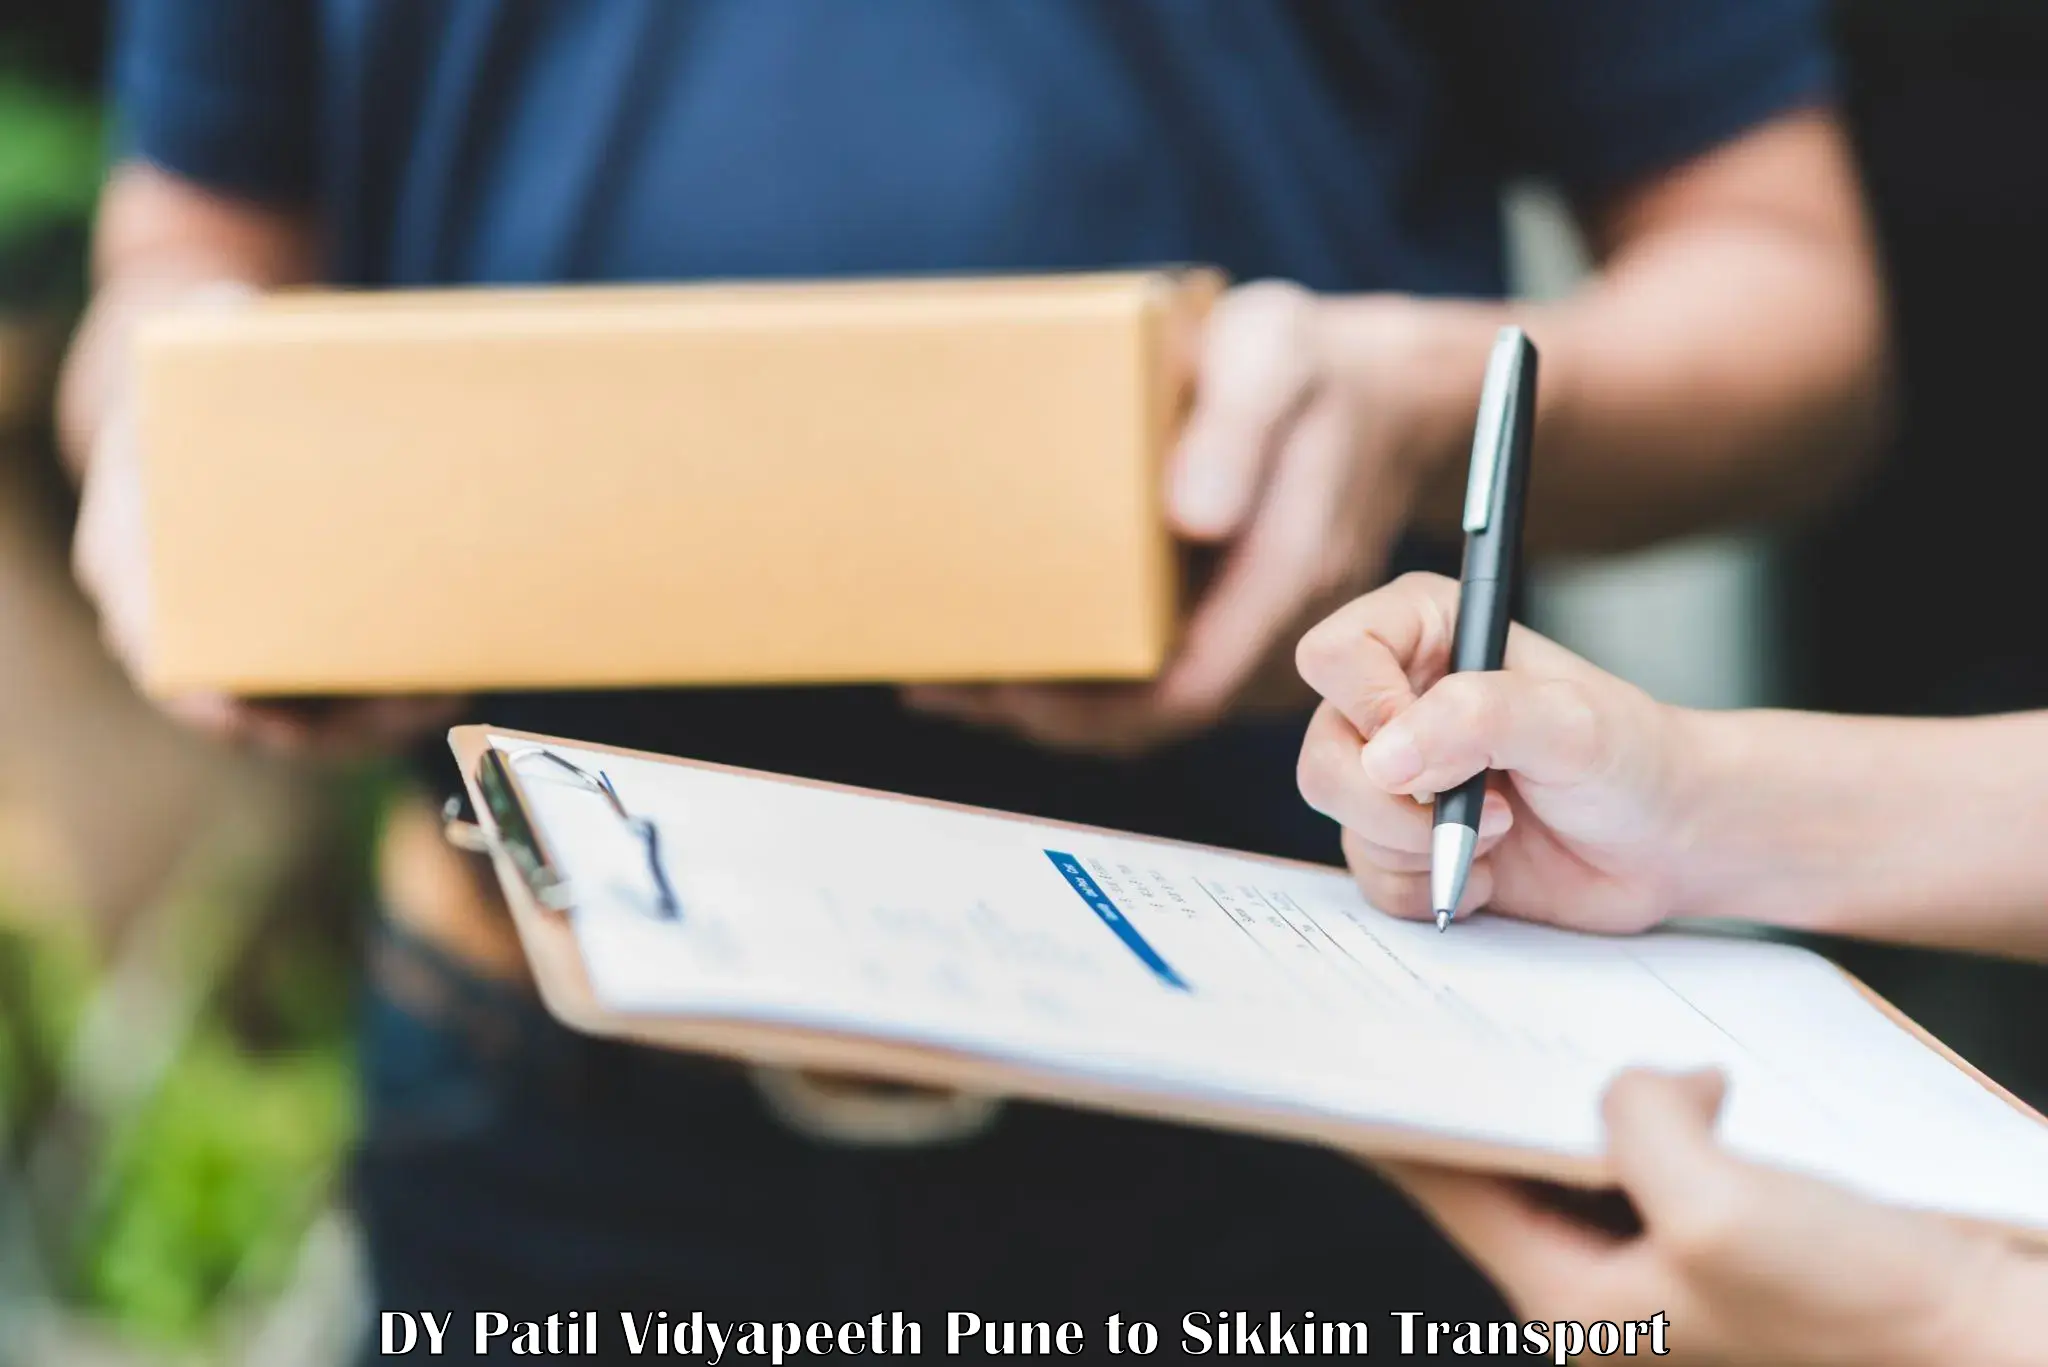 Road transport online services DY Patil Vidyapeeth Pune to Namchi